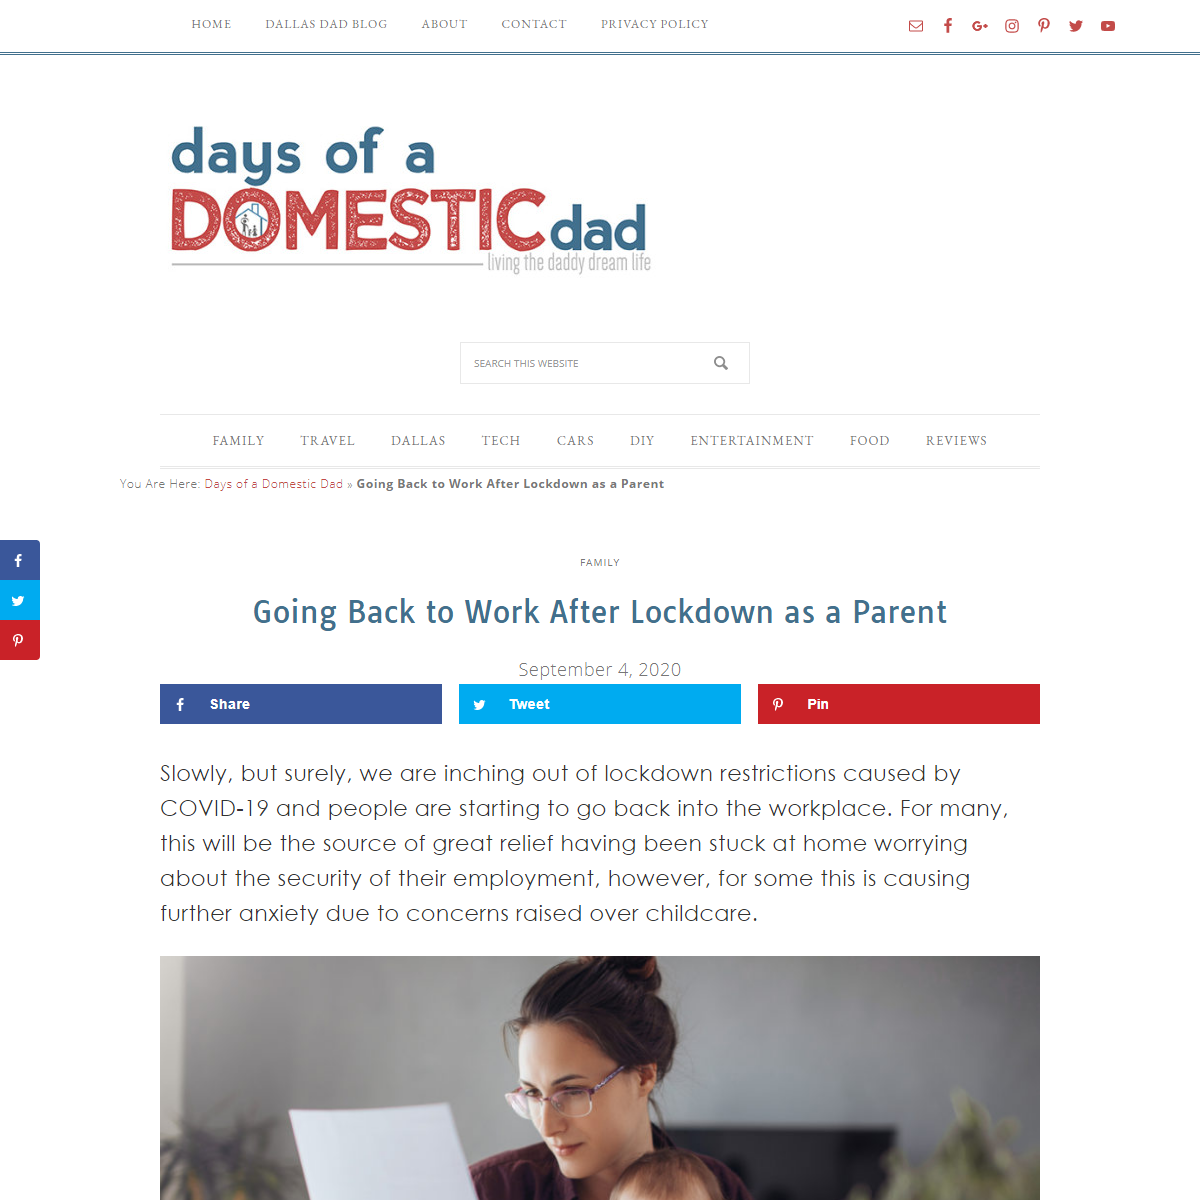 A complete backup of https://daysofadomesticdad.com/going-back-to-work-after-lockdown-as-a-parent/